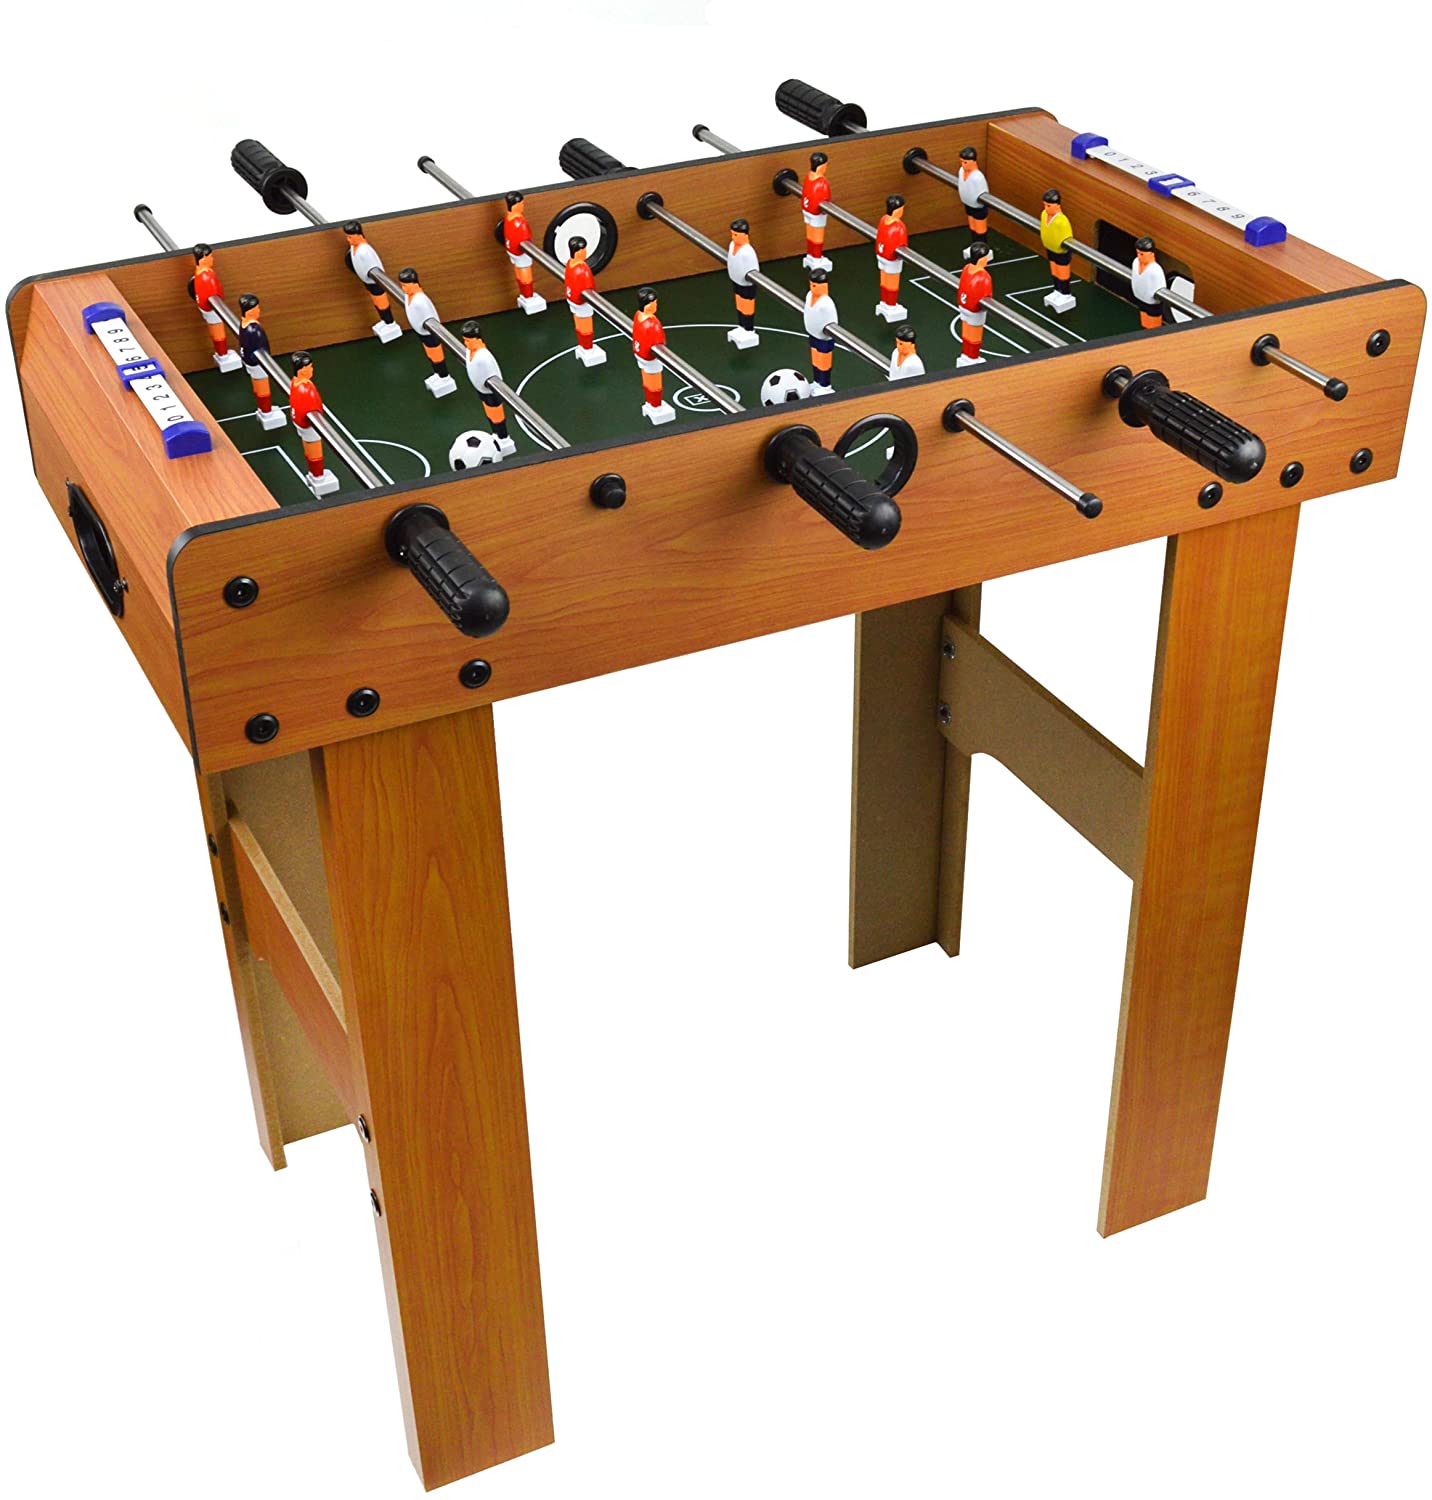 Jimmy's Toys 27'’ Foosball Table for Kids - Full Size Game Room Table for Children - image 1 of 5